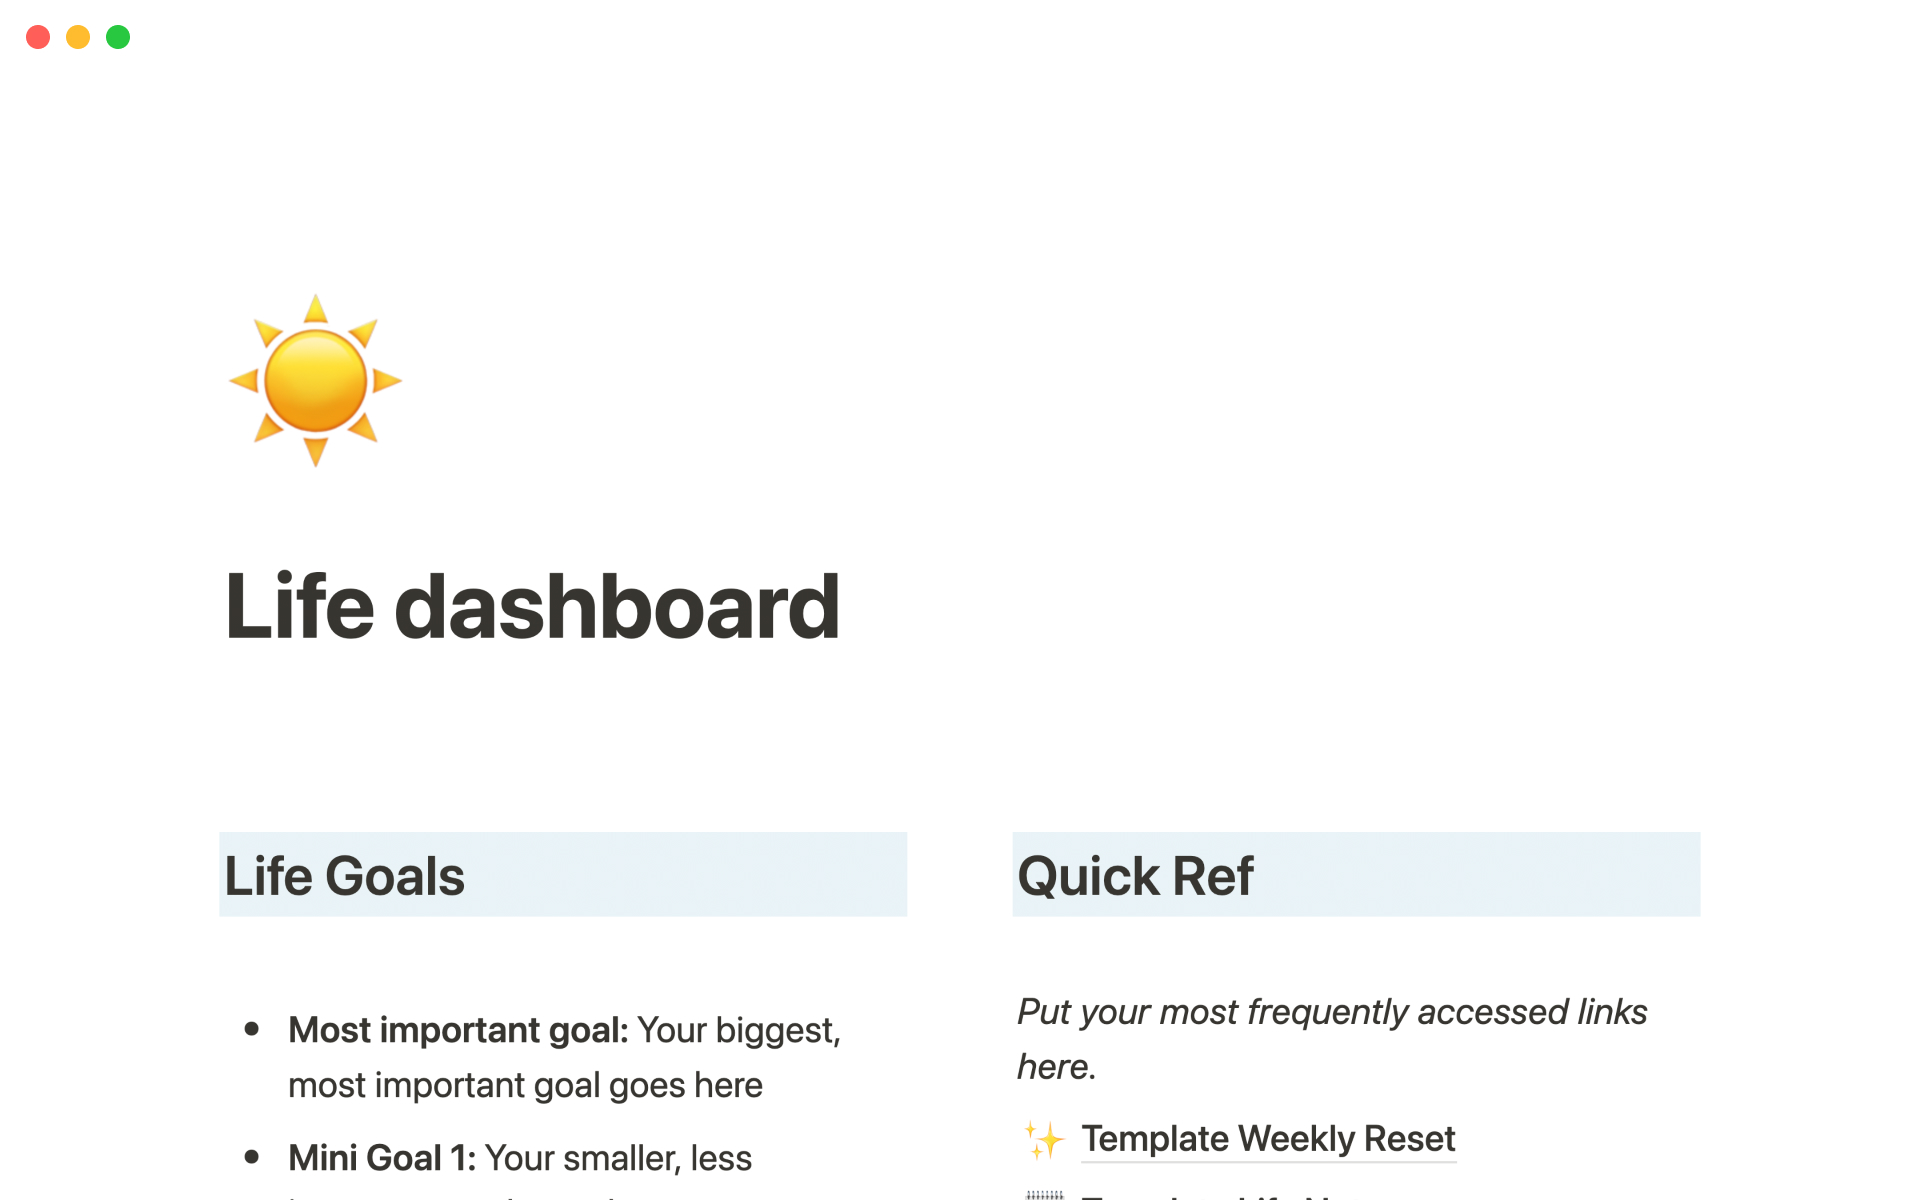 A dashboard to track everything in your life in one view.